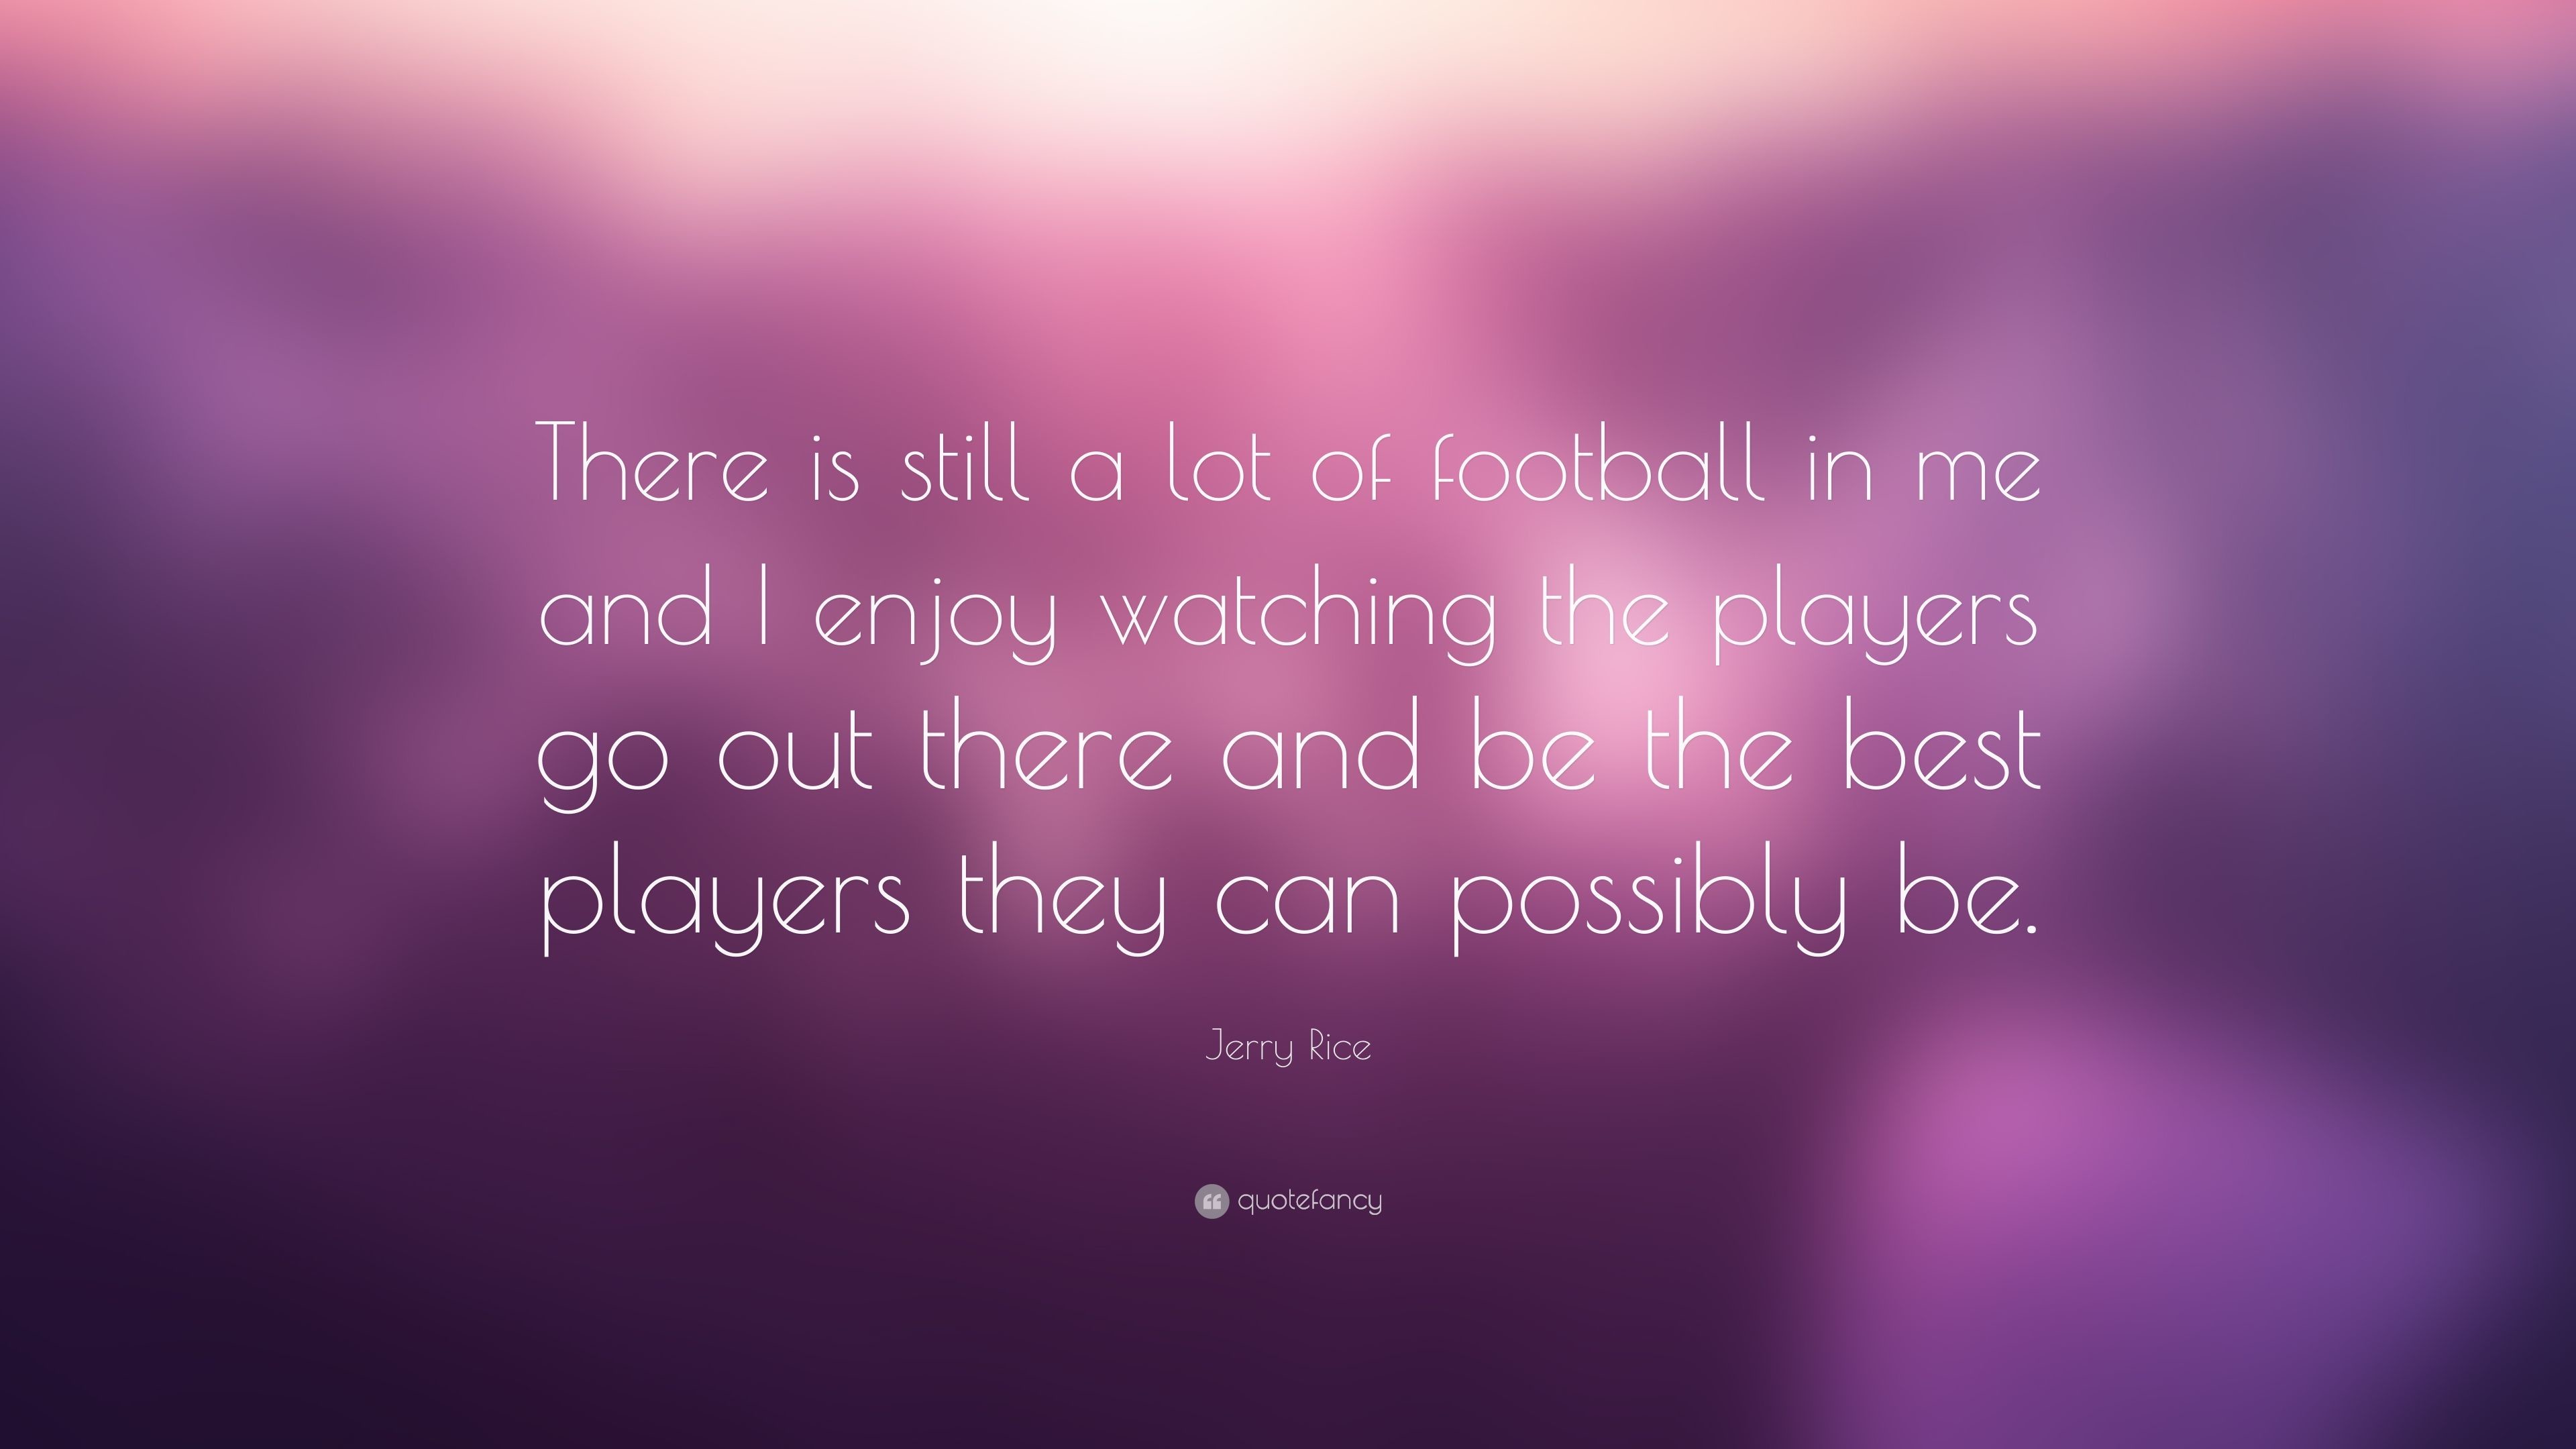 Jerry Rice Quote There is still a lot of football in me and I